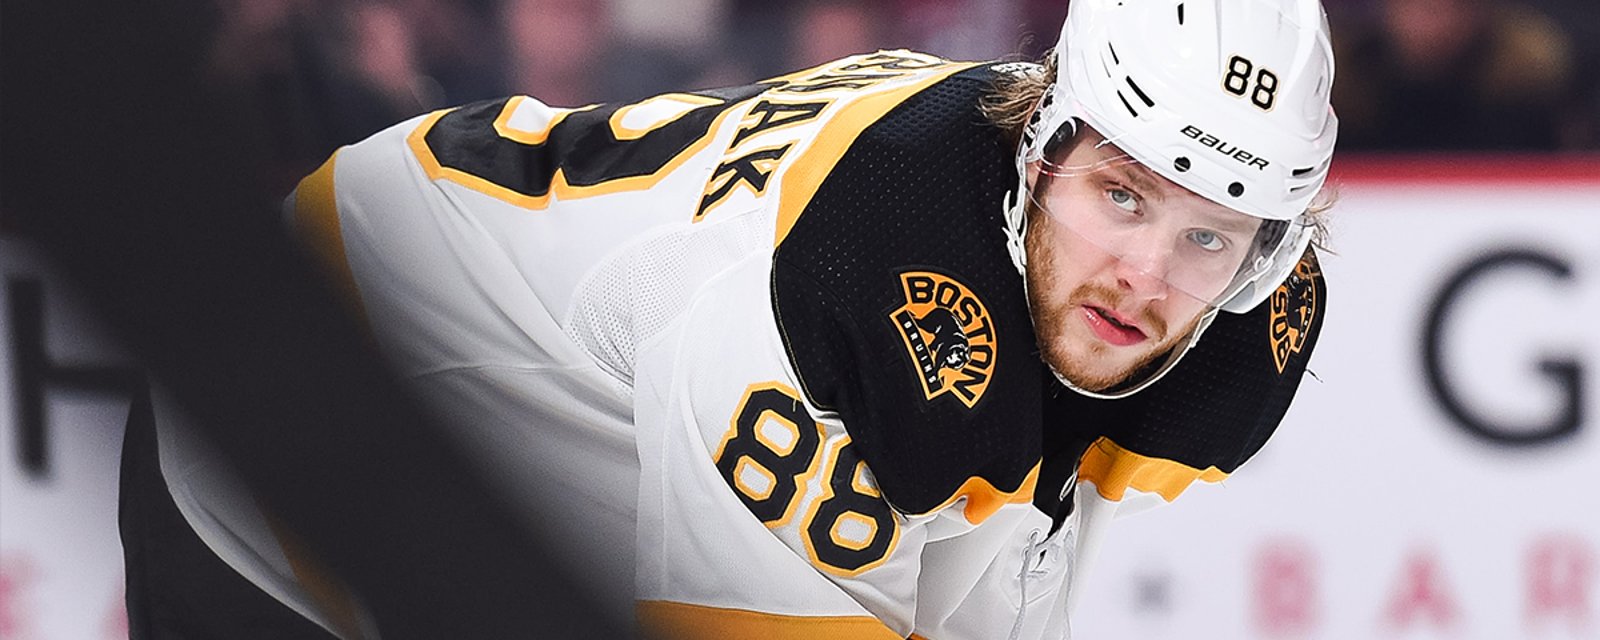 Pastrnak shares a funny story about the time John Scott challenged him to a fight